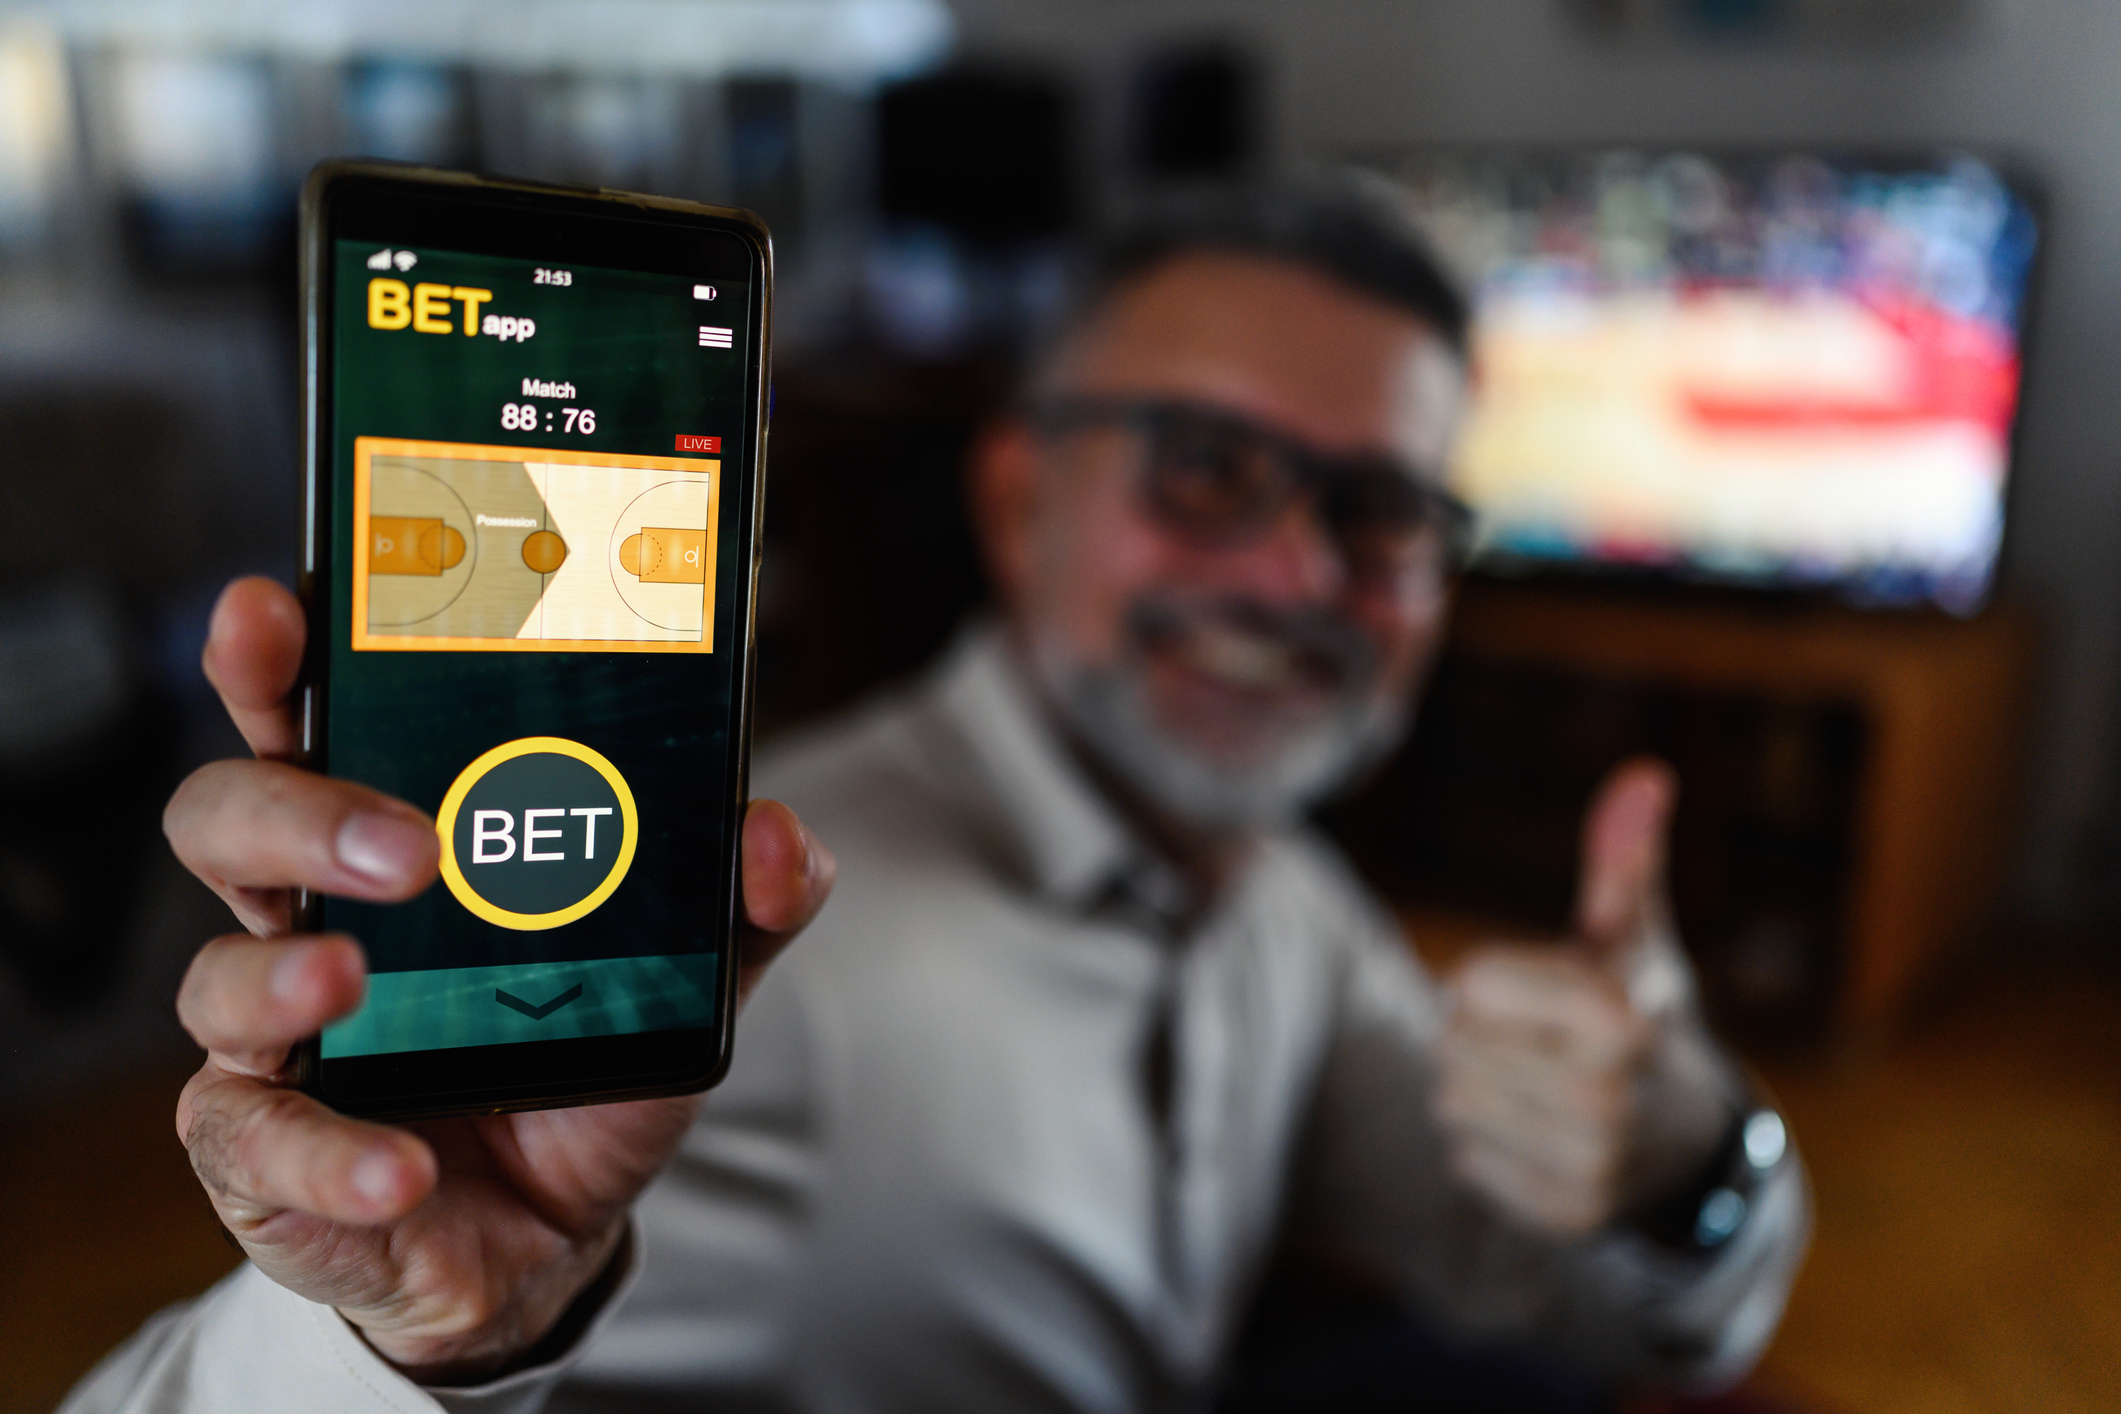 Man showing phone with betting app open, thumb up, blurred TV with sports game in background